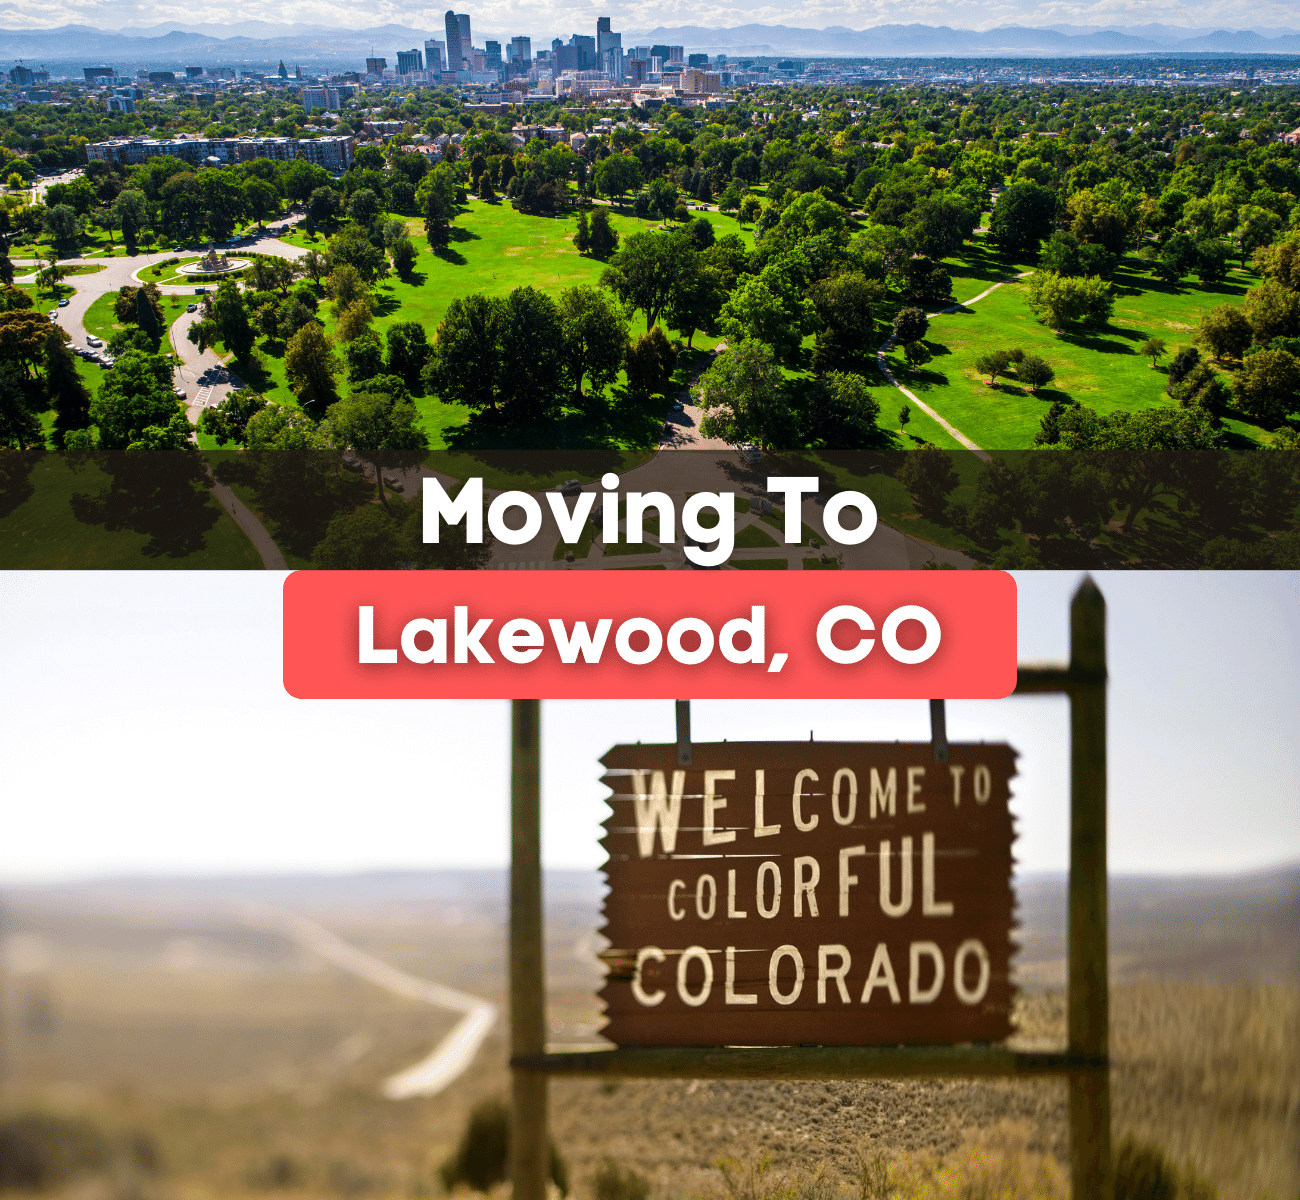 Moving to Lakewood, CO - What is it like living in Lakewood, Colorado?